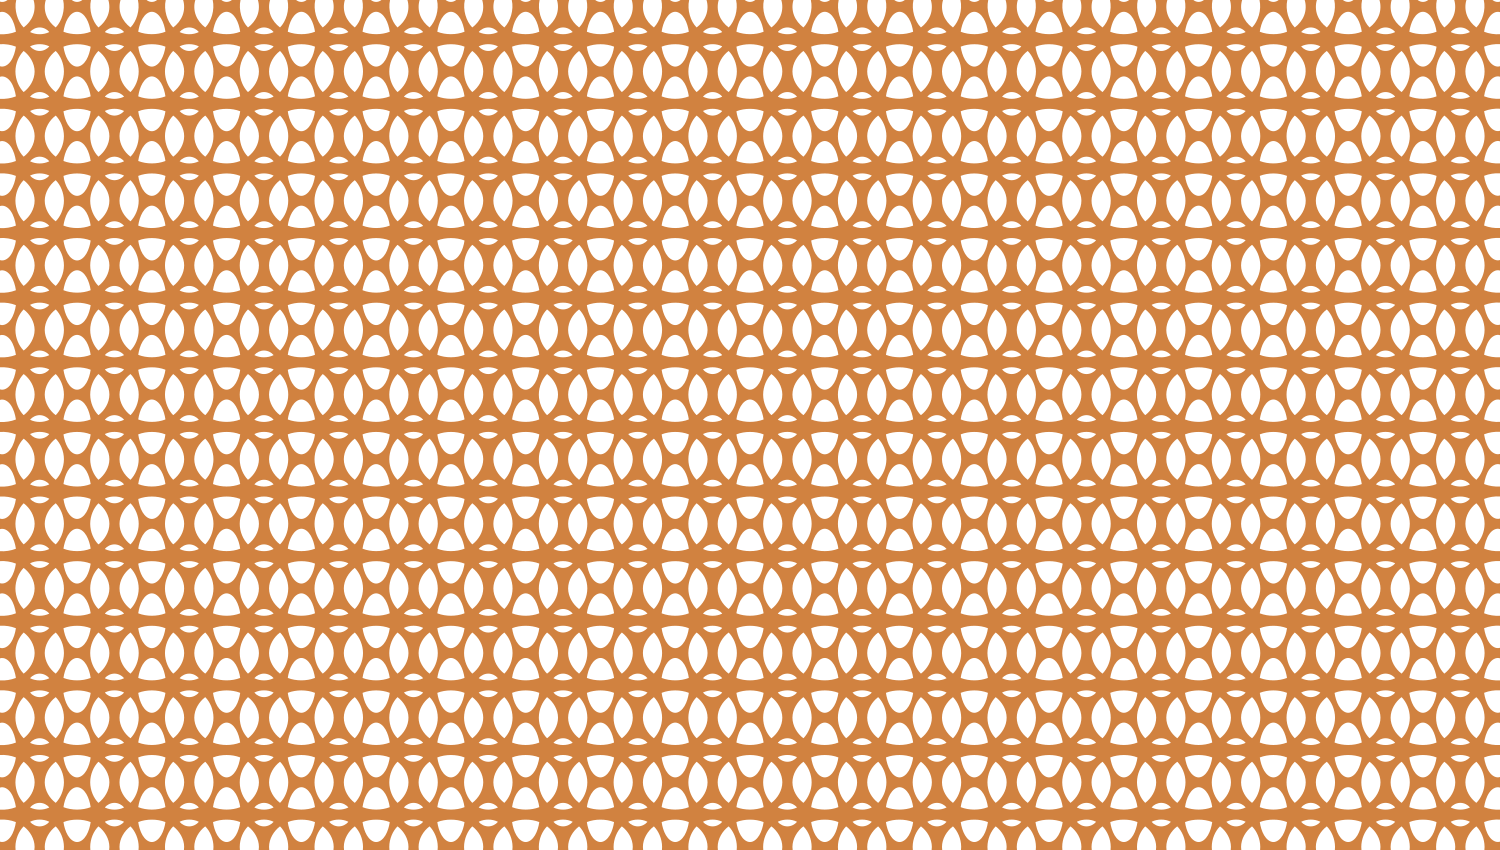 Parasoleil™ Julius© pattern displayed with a ochre color overlay